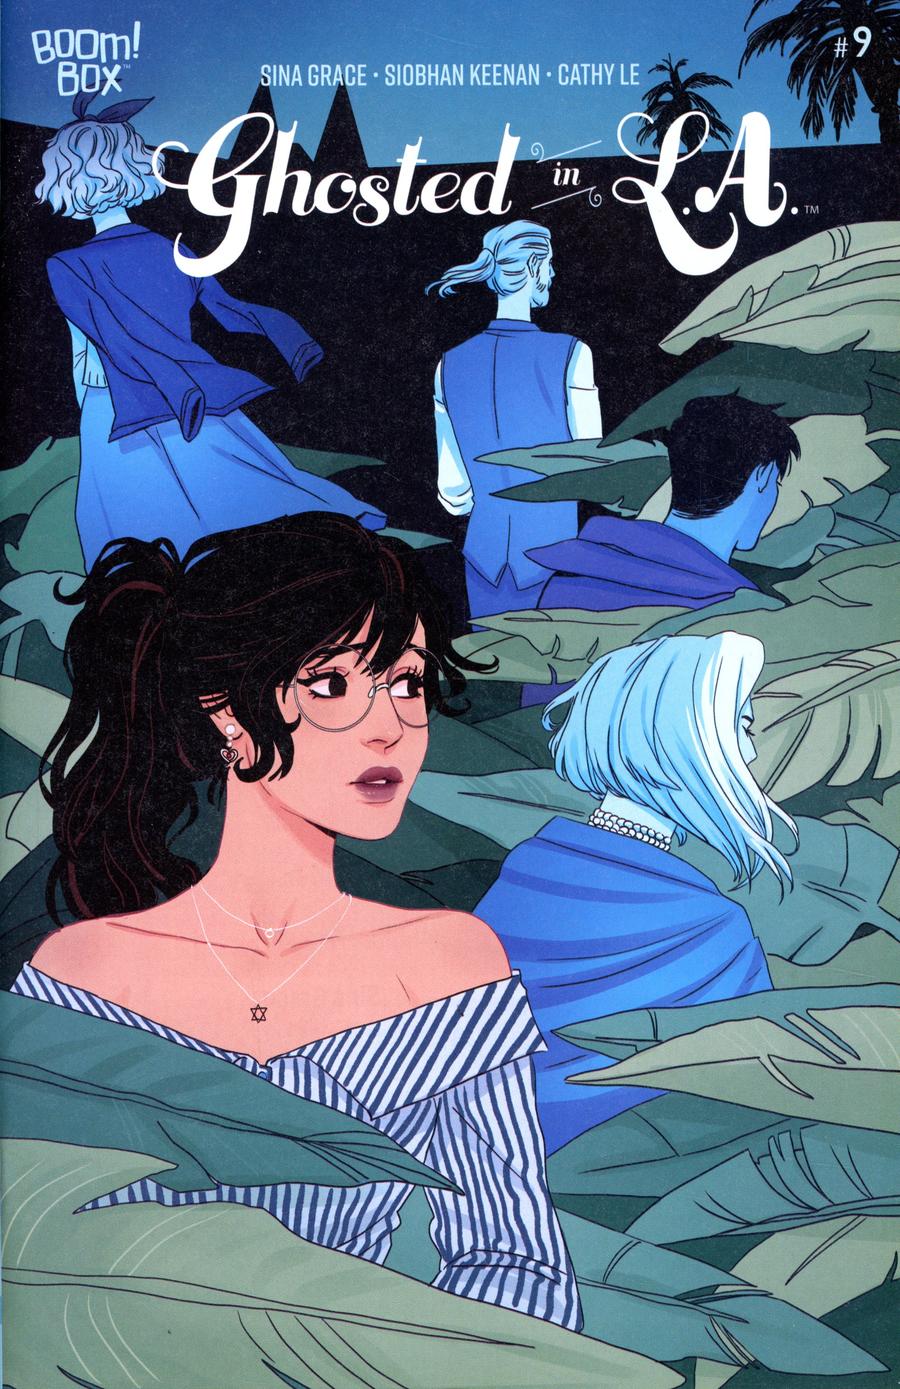 Ghosted In LA #9 Cover A Regular Siobhan Keenan Cover